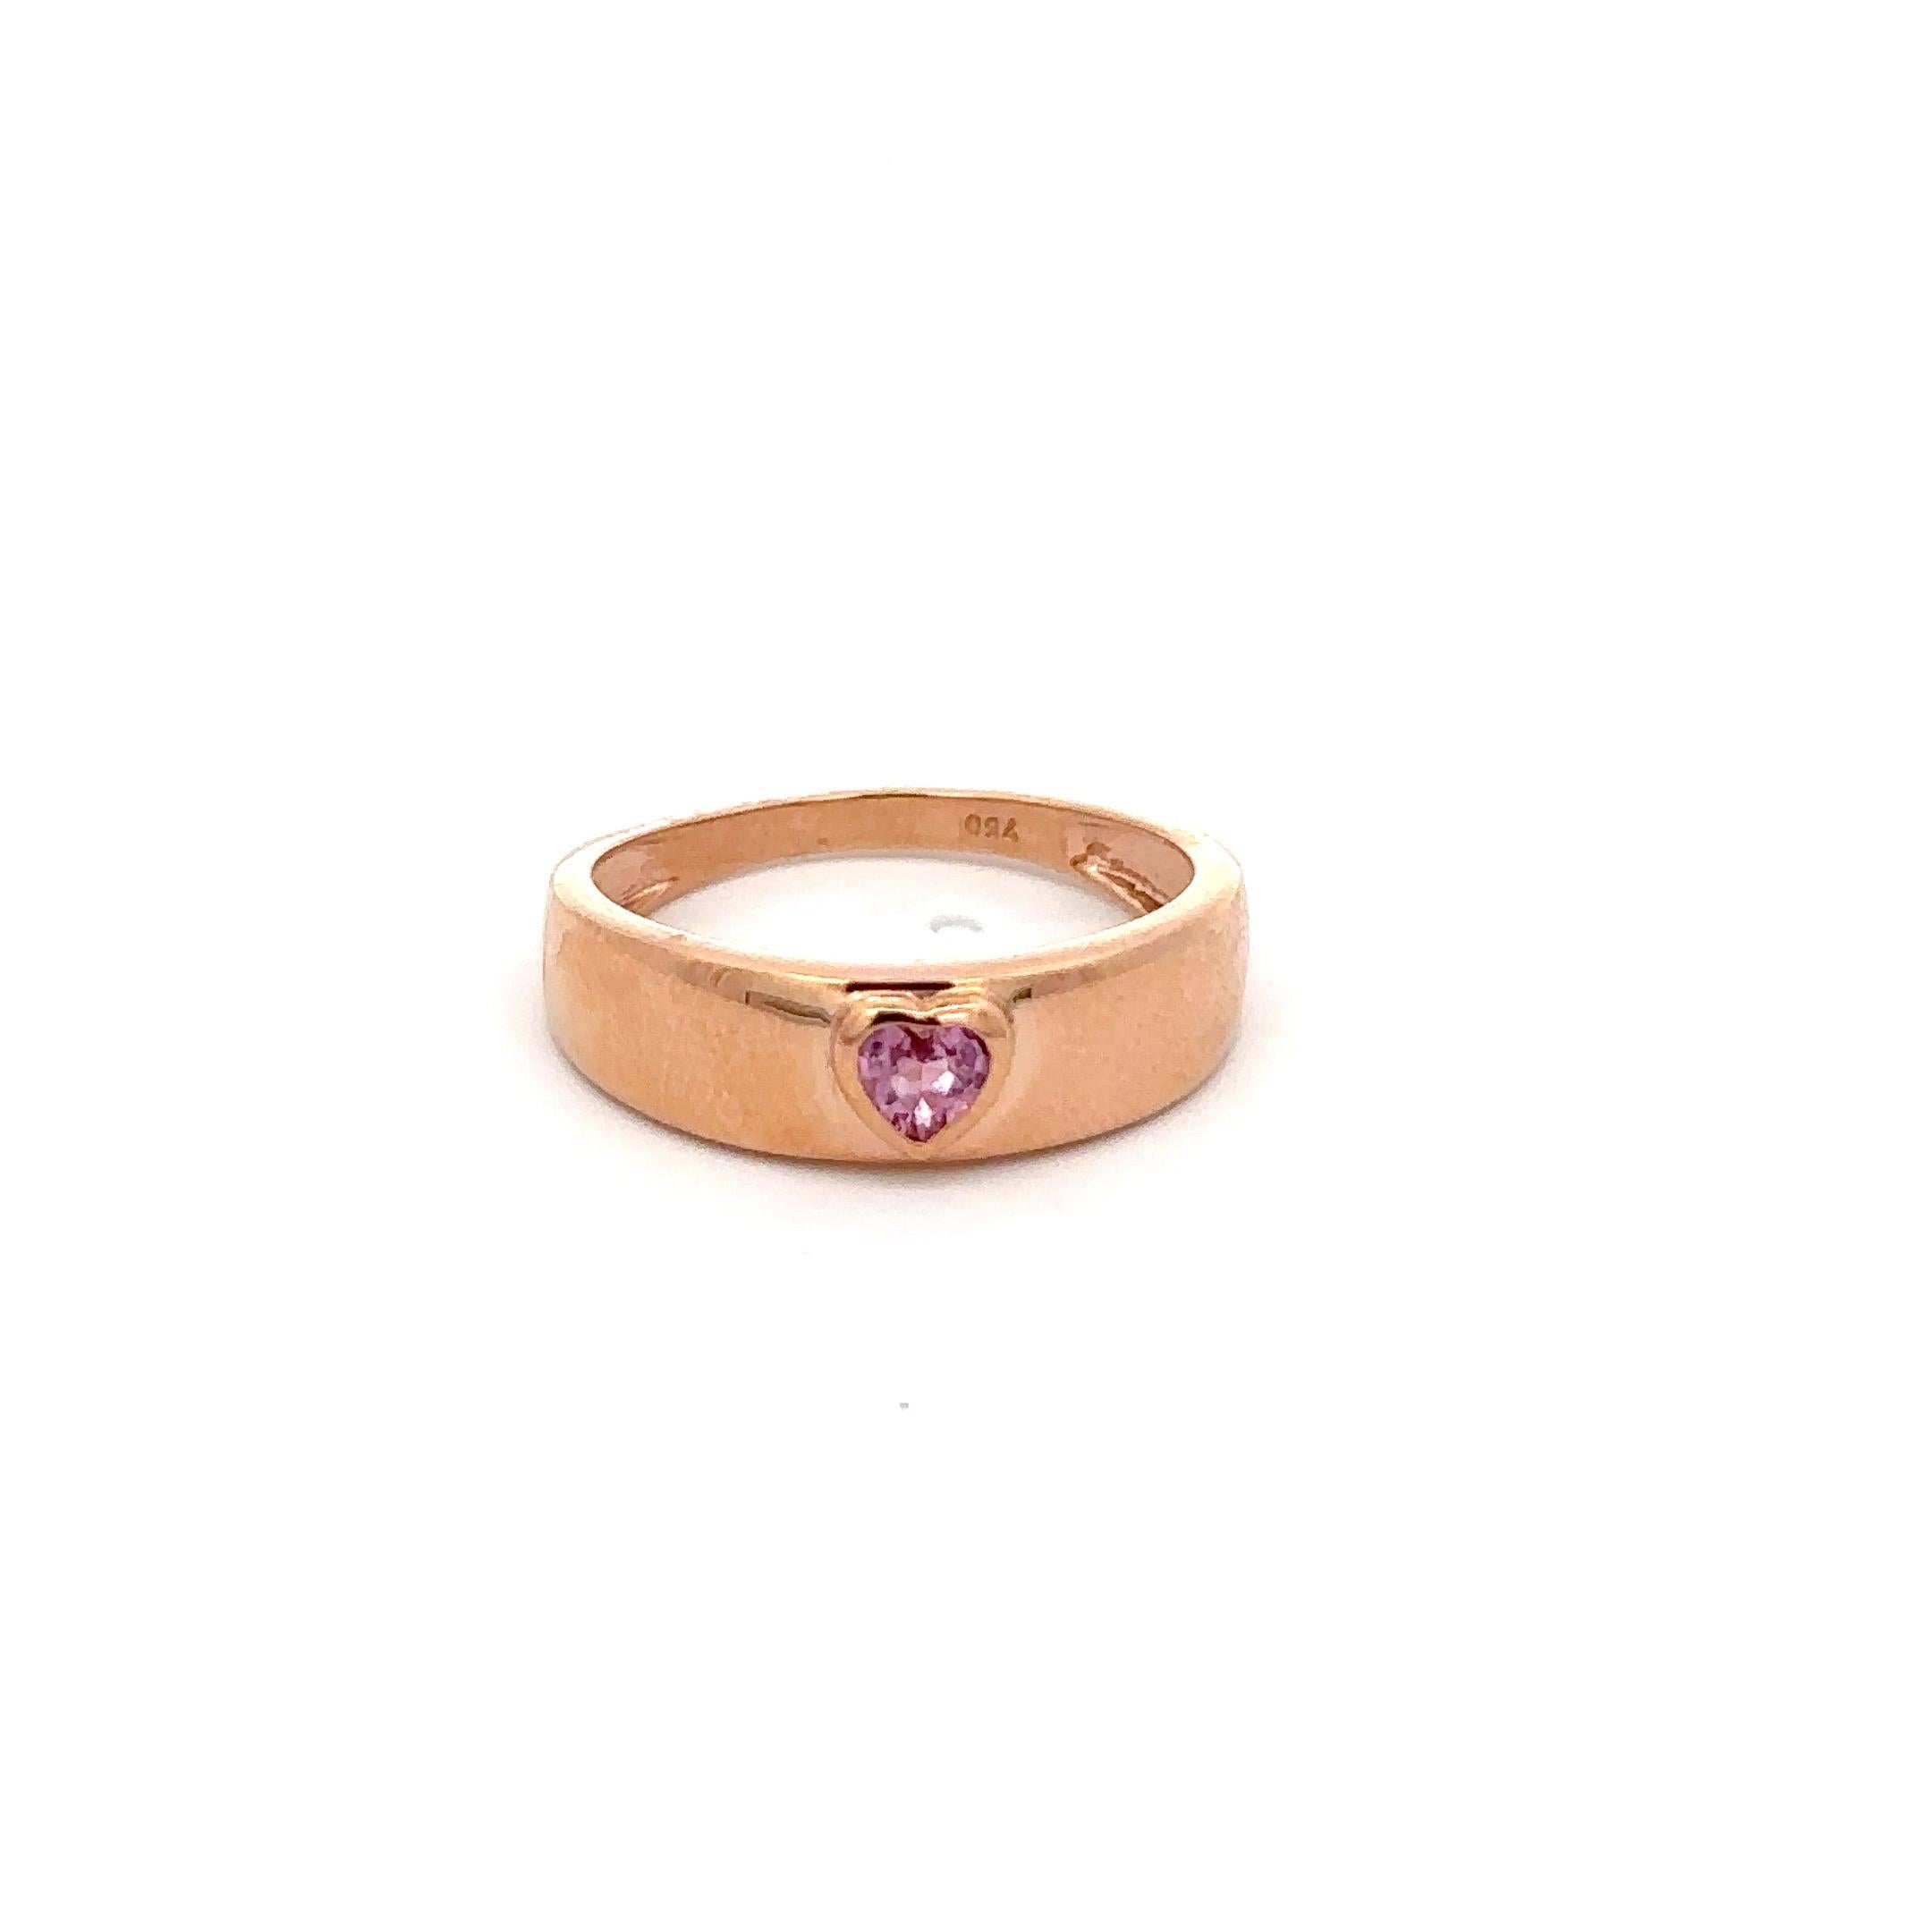 For Sale:  18k Solid Rose Gold Signet Ring Dainty Heart Cut Pink Sapphire Pinky Ring  4